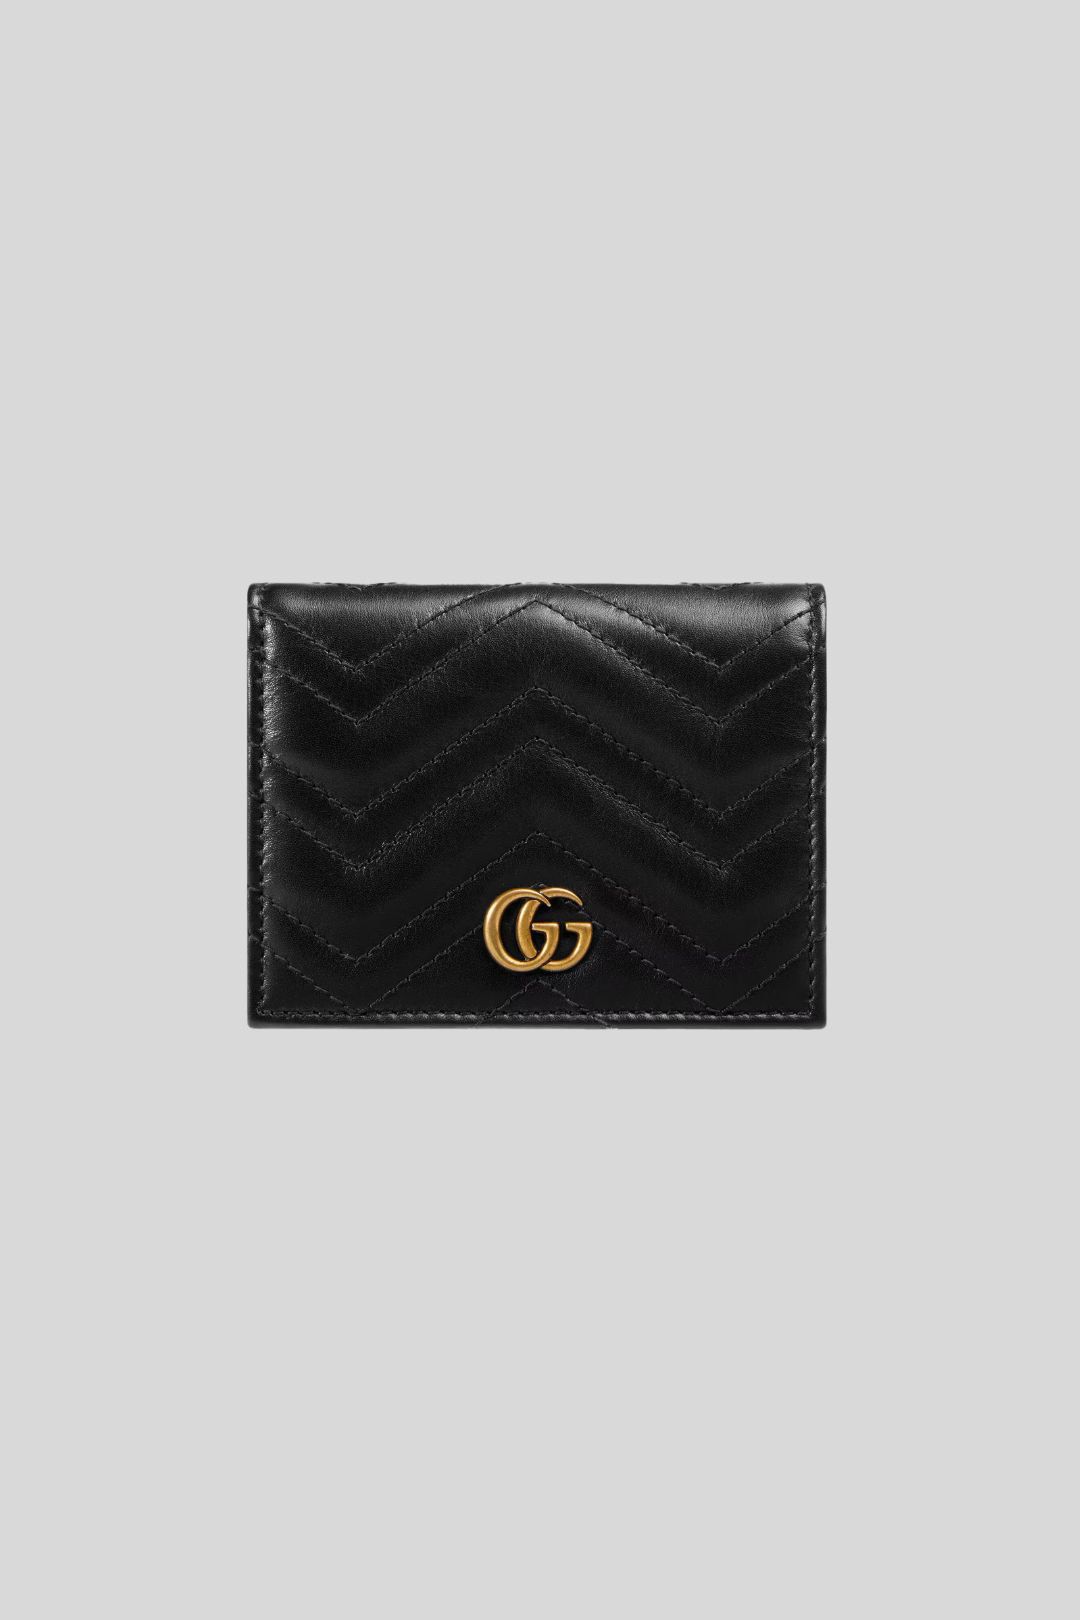 Gucci Black Leather Marmont Card Case Wallet